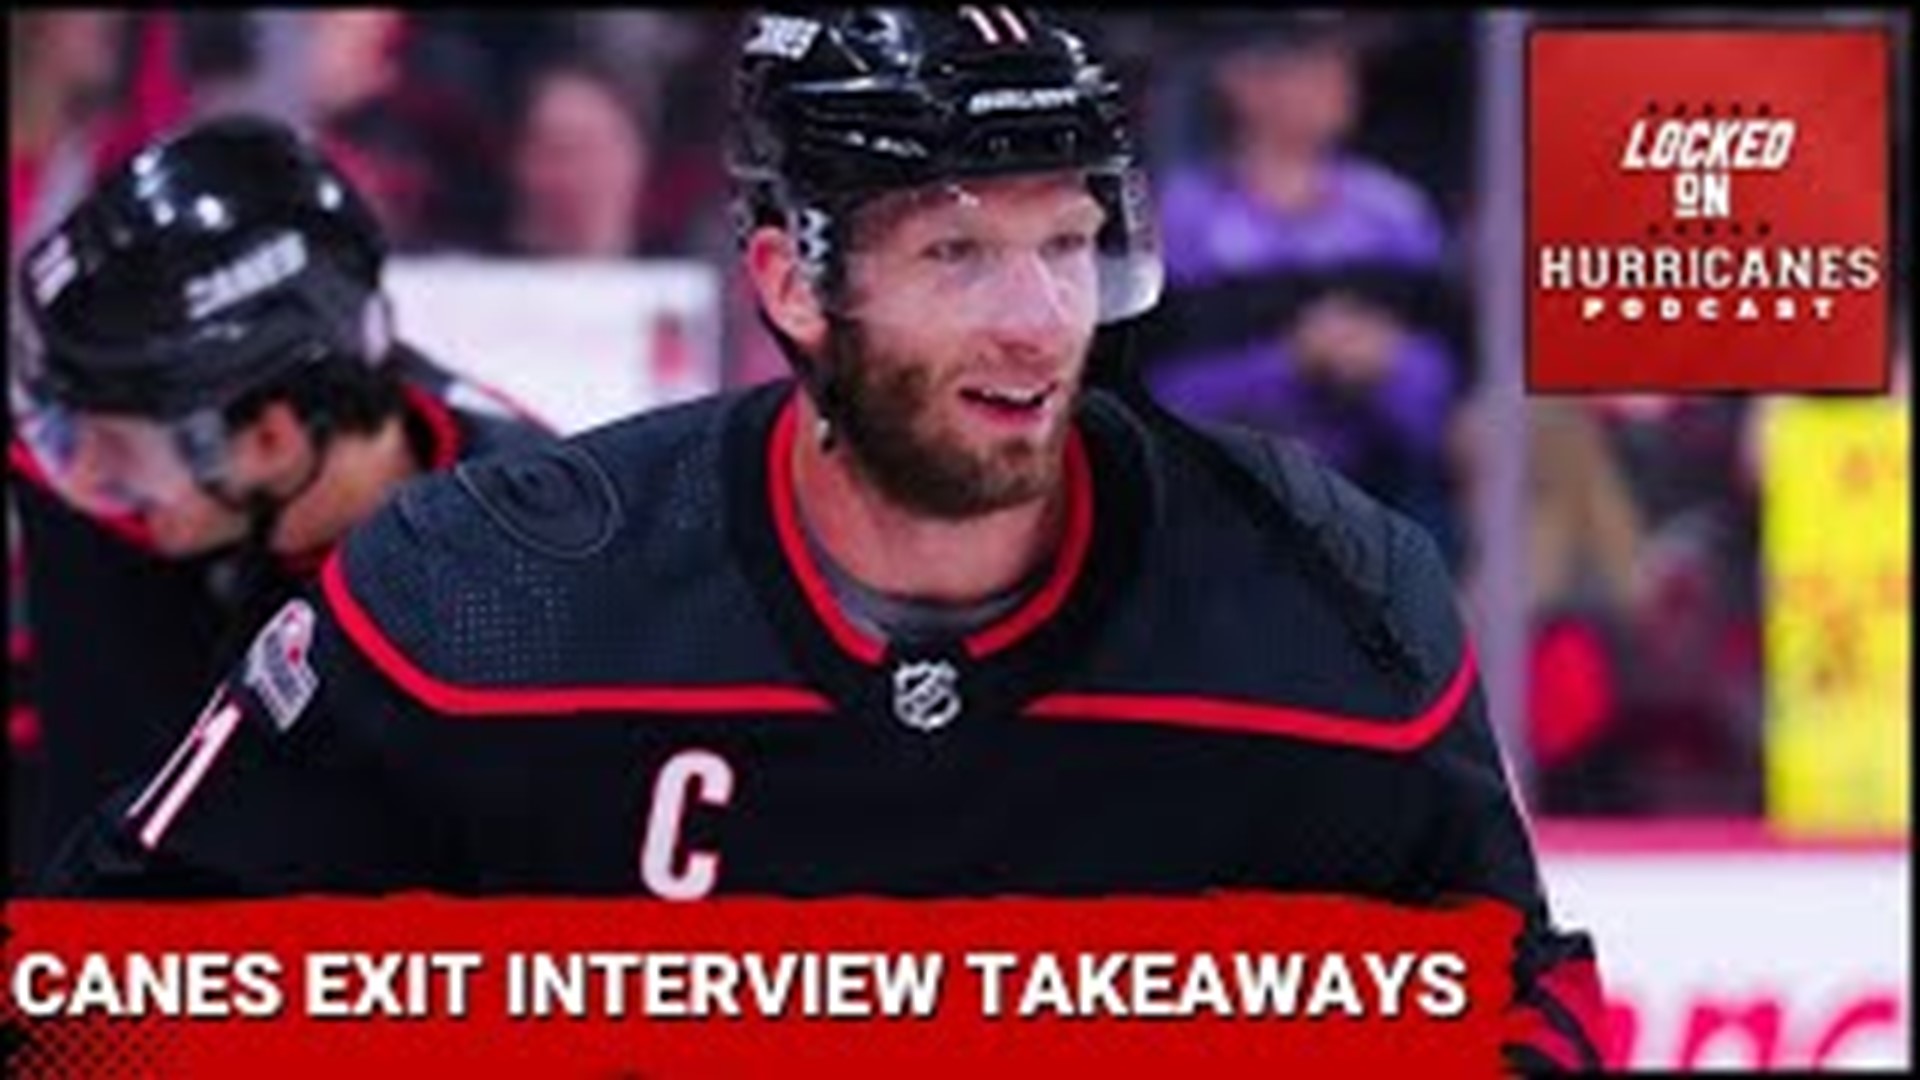 Exit interviews happened over the weekend, here are some of the takeaways from some notable interviews. That and more on Locked On Hurricanes.